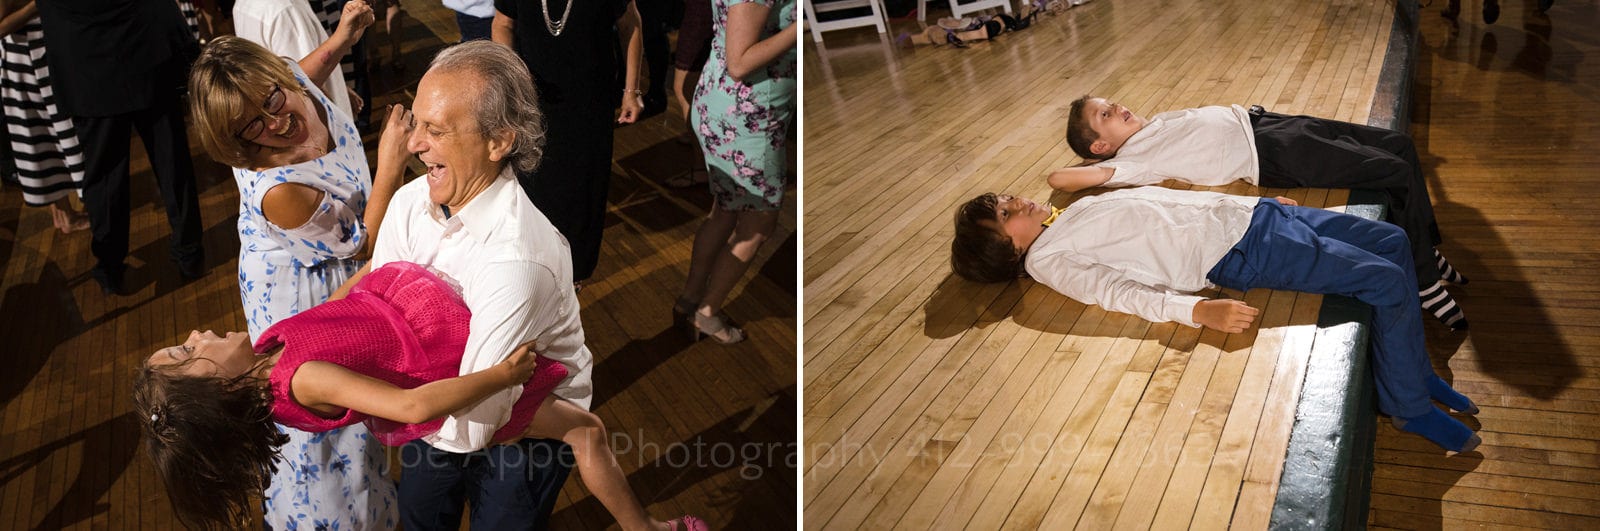 A man holds a young girl as she flops backwards while they dance. Two boys lay on the edge of a stage with their legs dangling over during Soldiers and Sailors Wedding Photos.